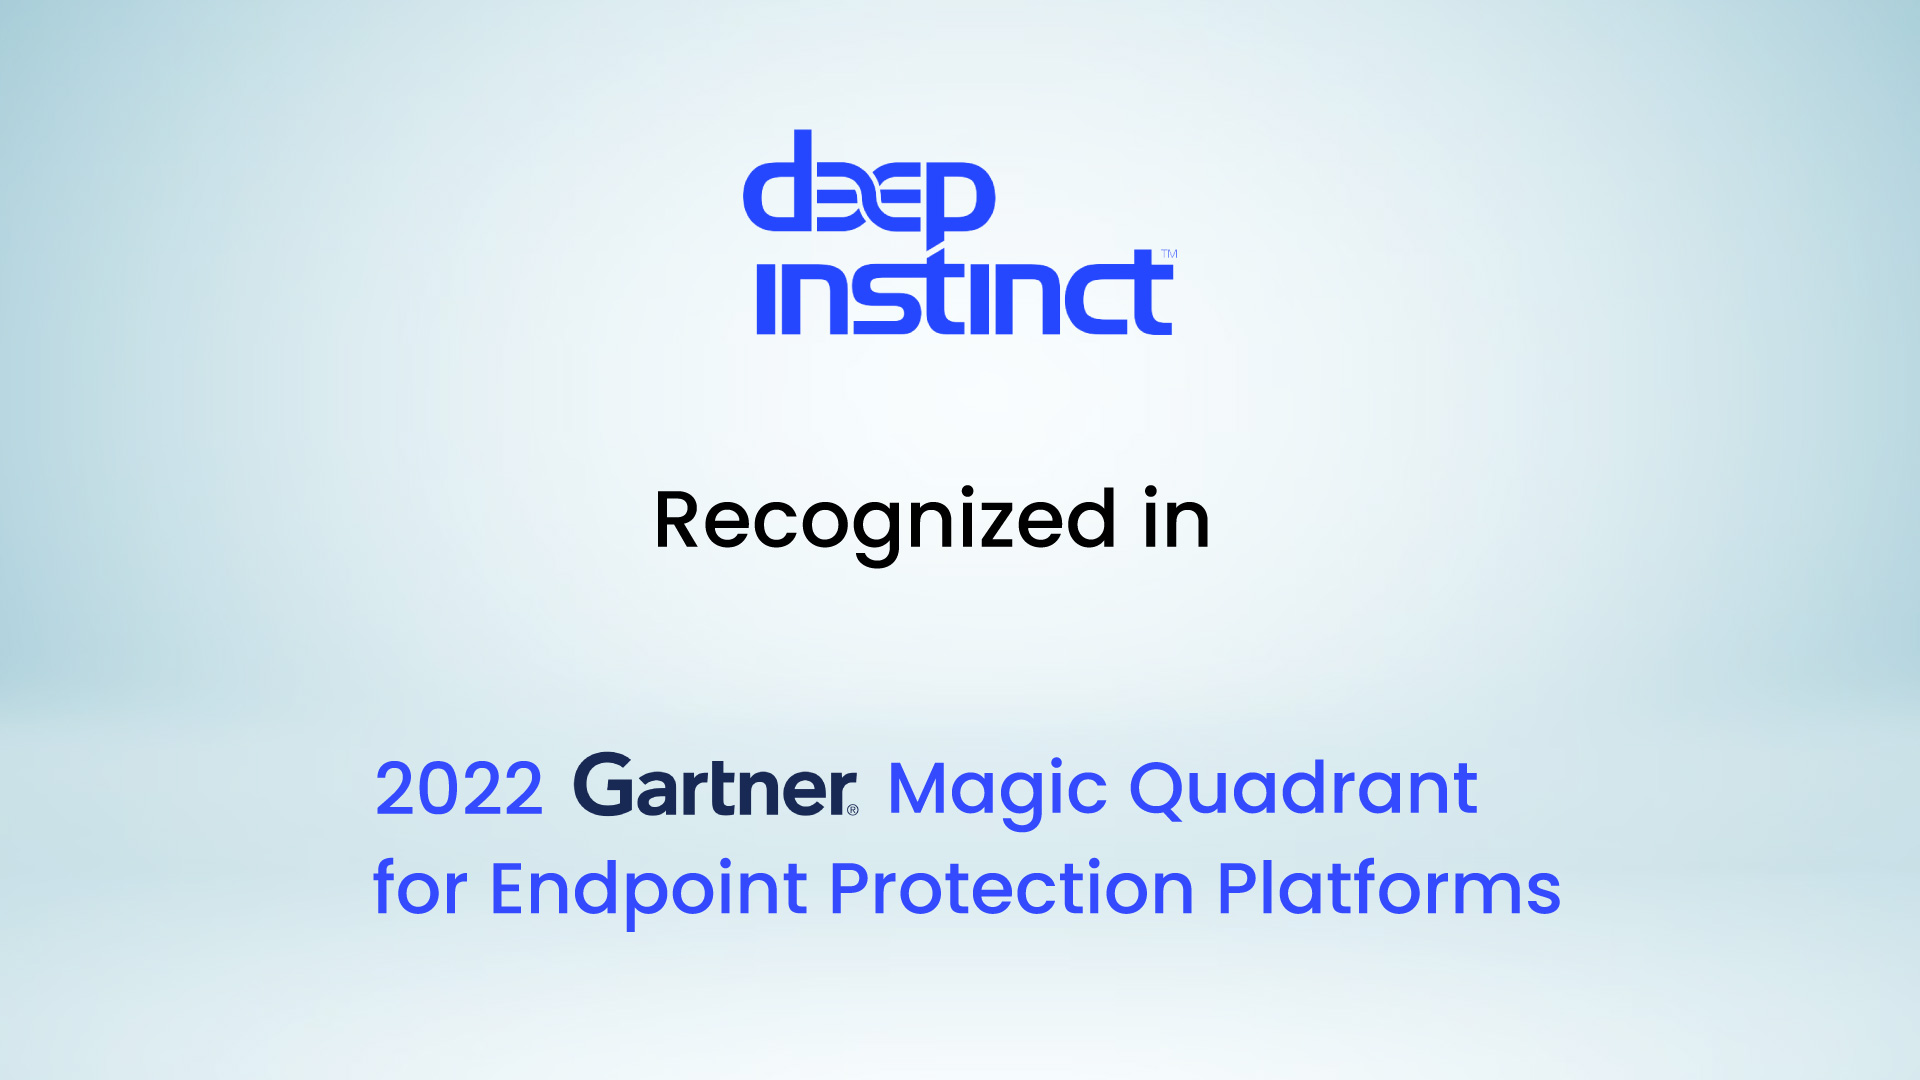 Deep Instinct Included in the 2022 Gartner® Magic Quadrant™ for Endpoint Protection Platforms (EPP)